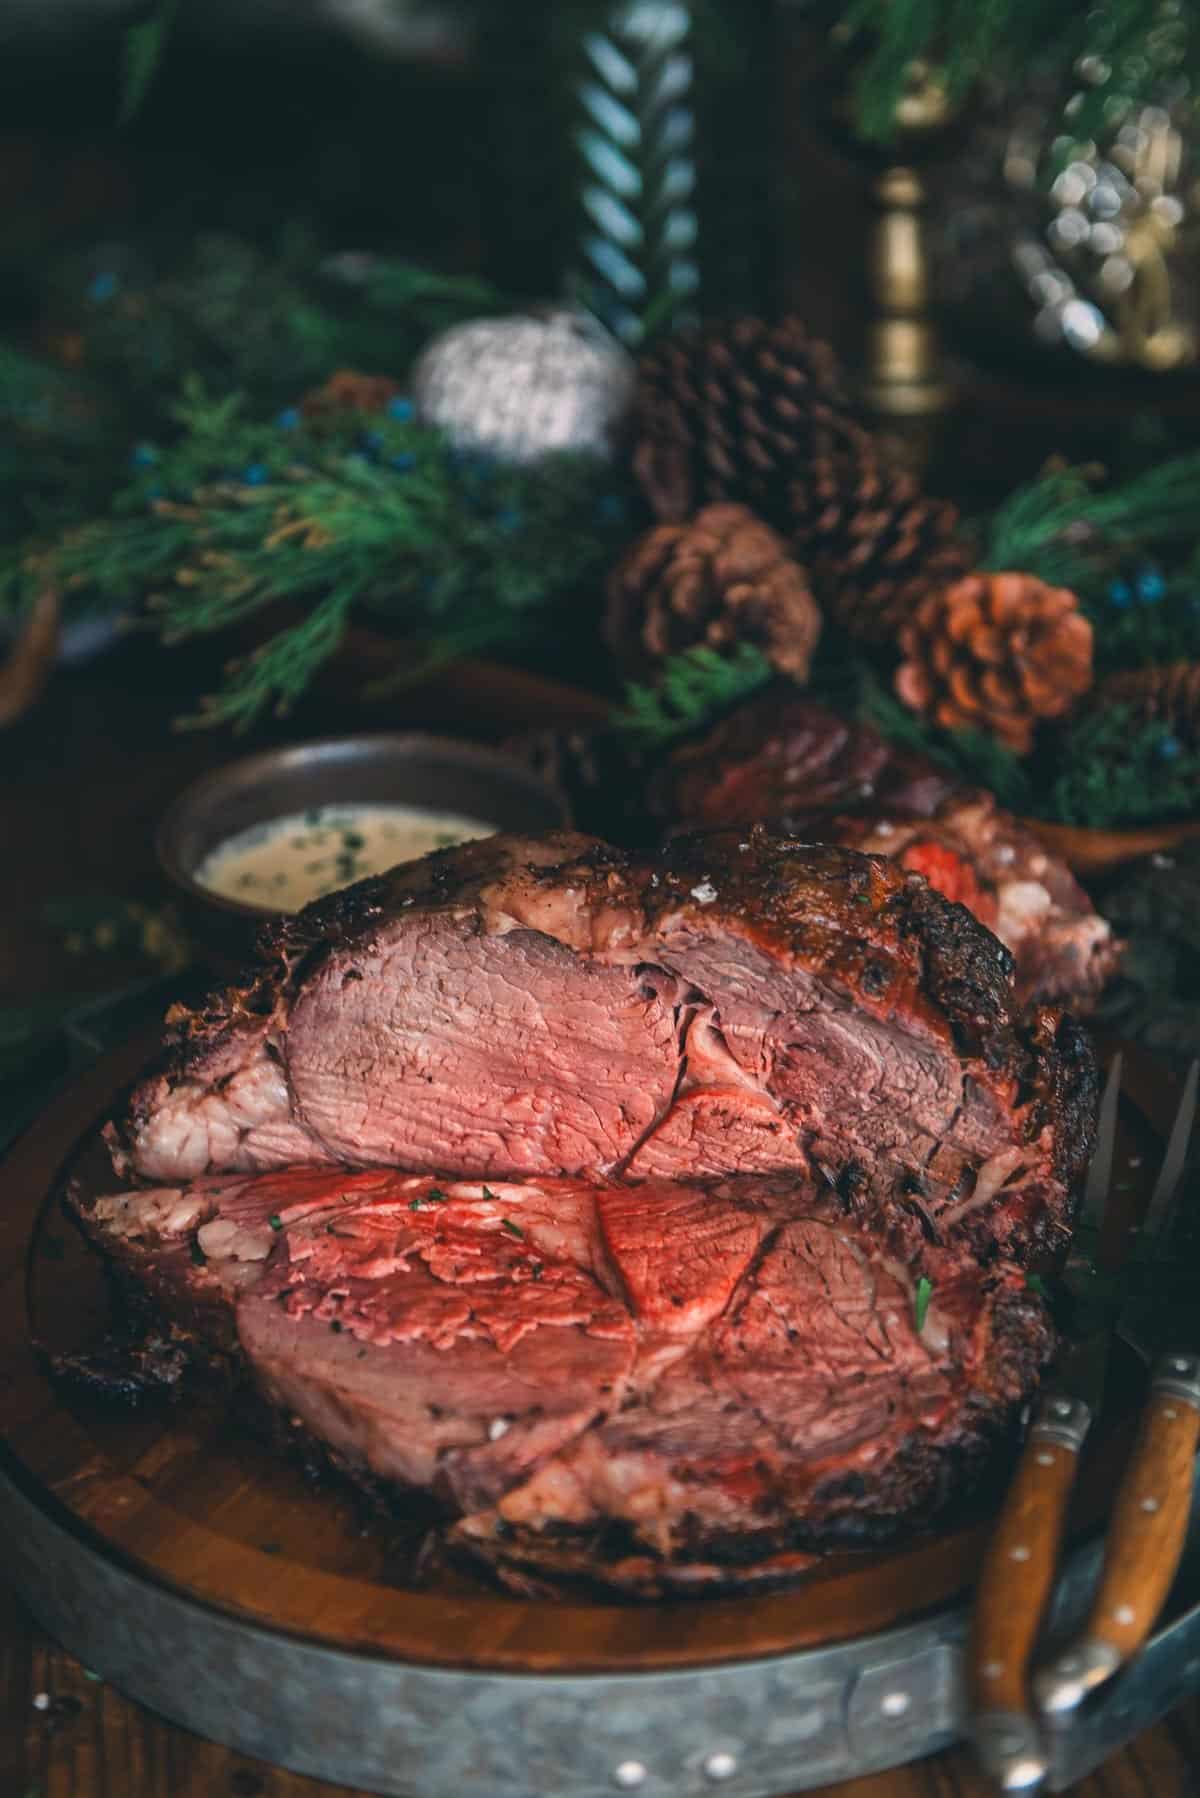 A prime rib thats been grilled and sliced on a wooden serving platter.